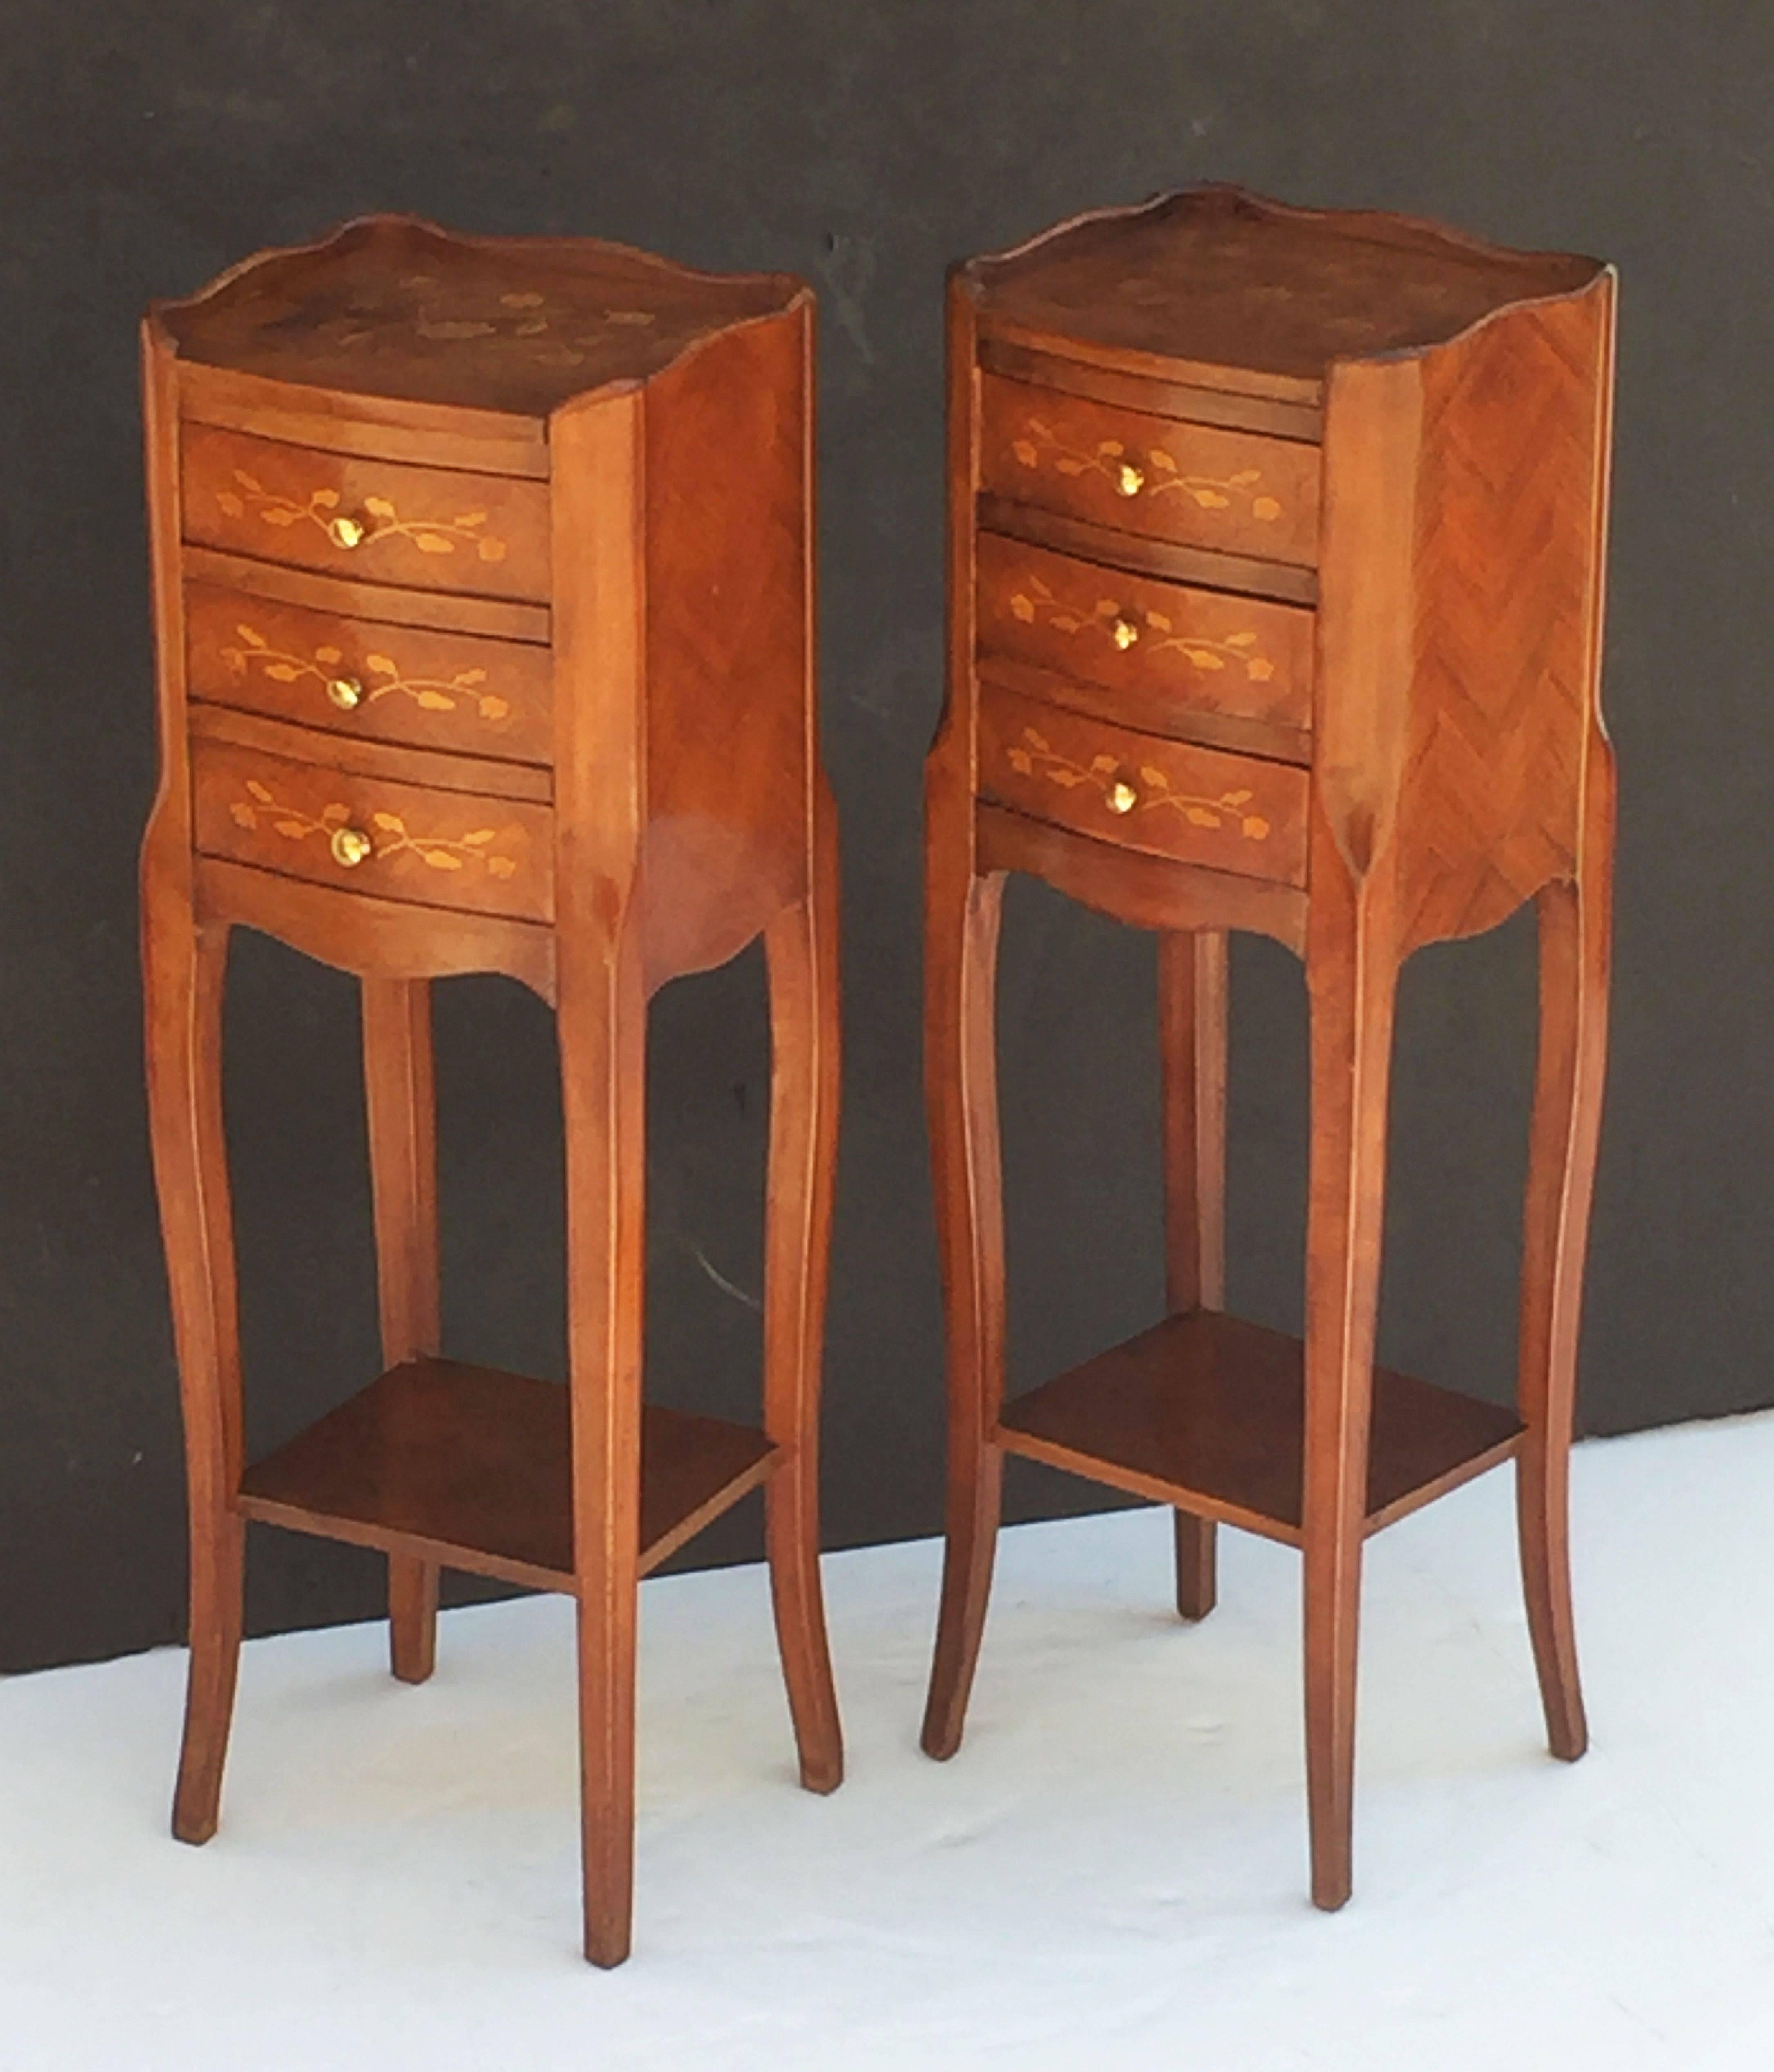 A fine pair of French bedside tables or nightstands, each stand featuring an inlaid top with serpentine gallery over a frieze of three inlaid drawers with brass pulls, marquetry sides and apron bottom, set upon four cabriole legs and stretcher